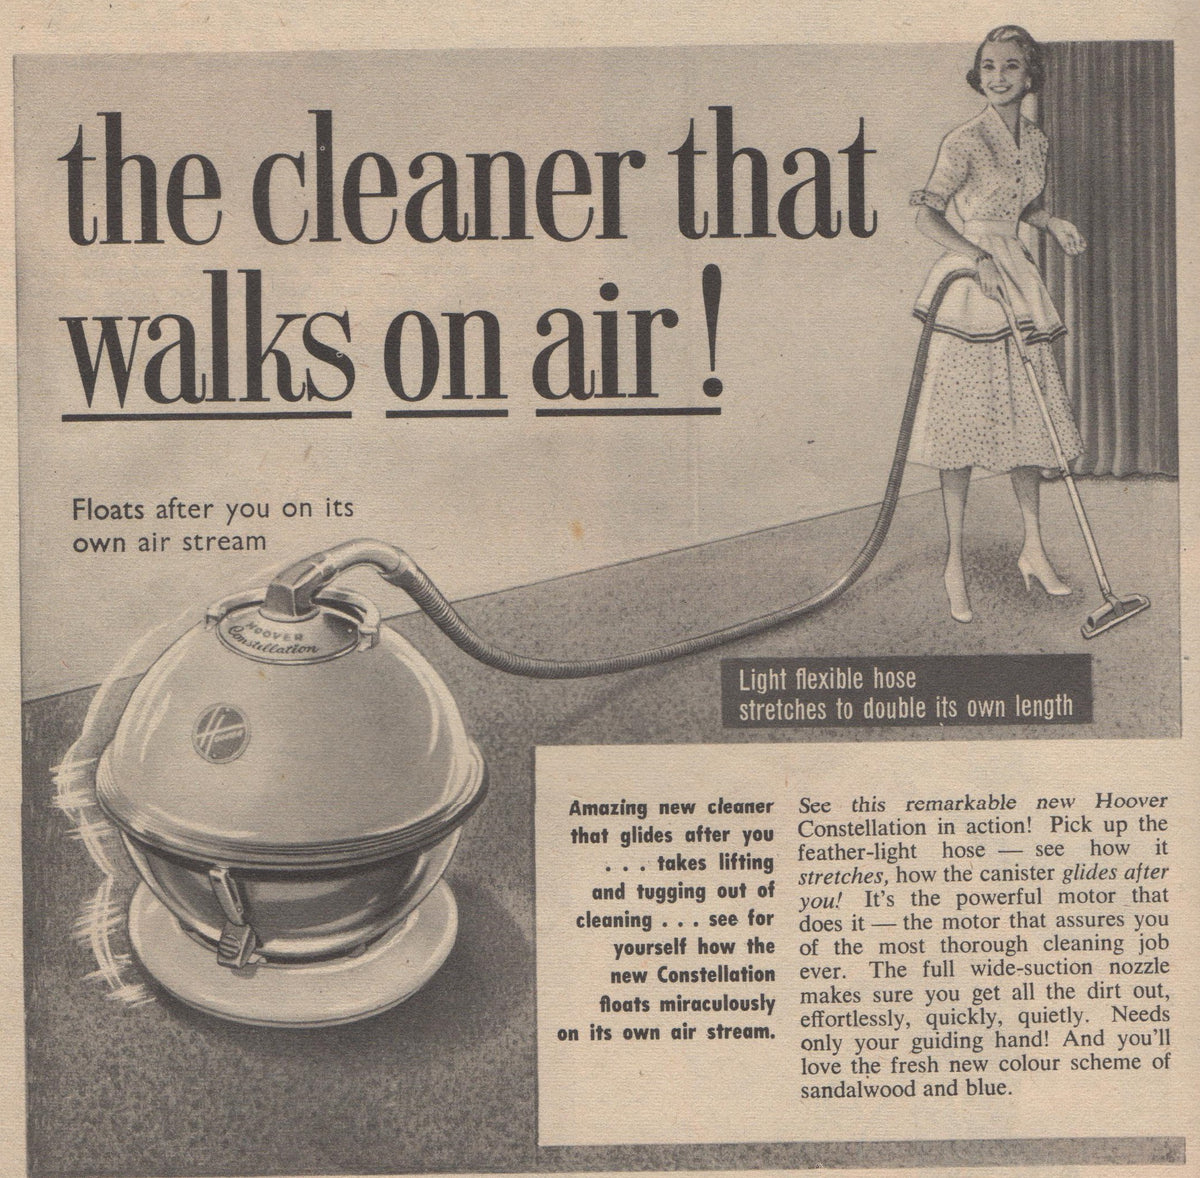 The 1950s Housewife image